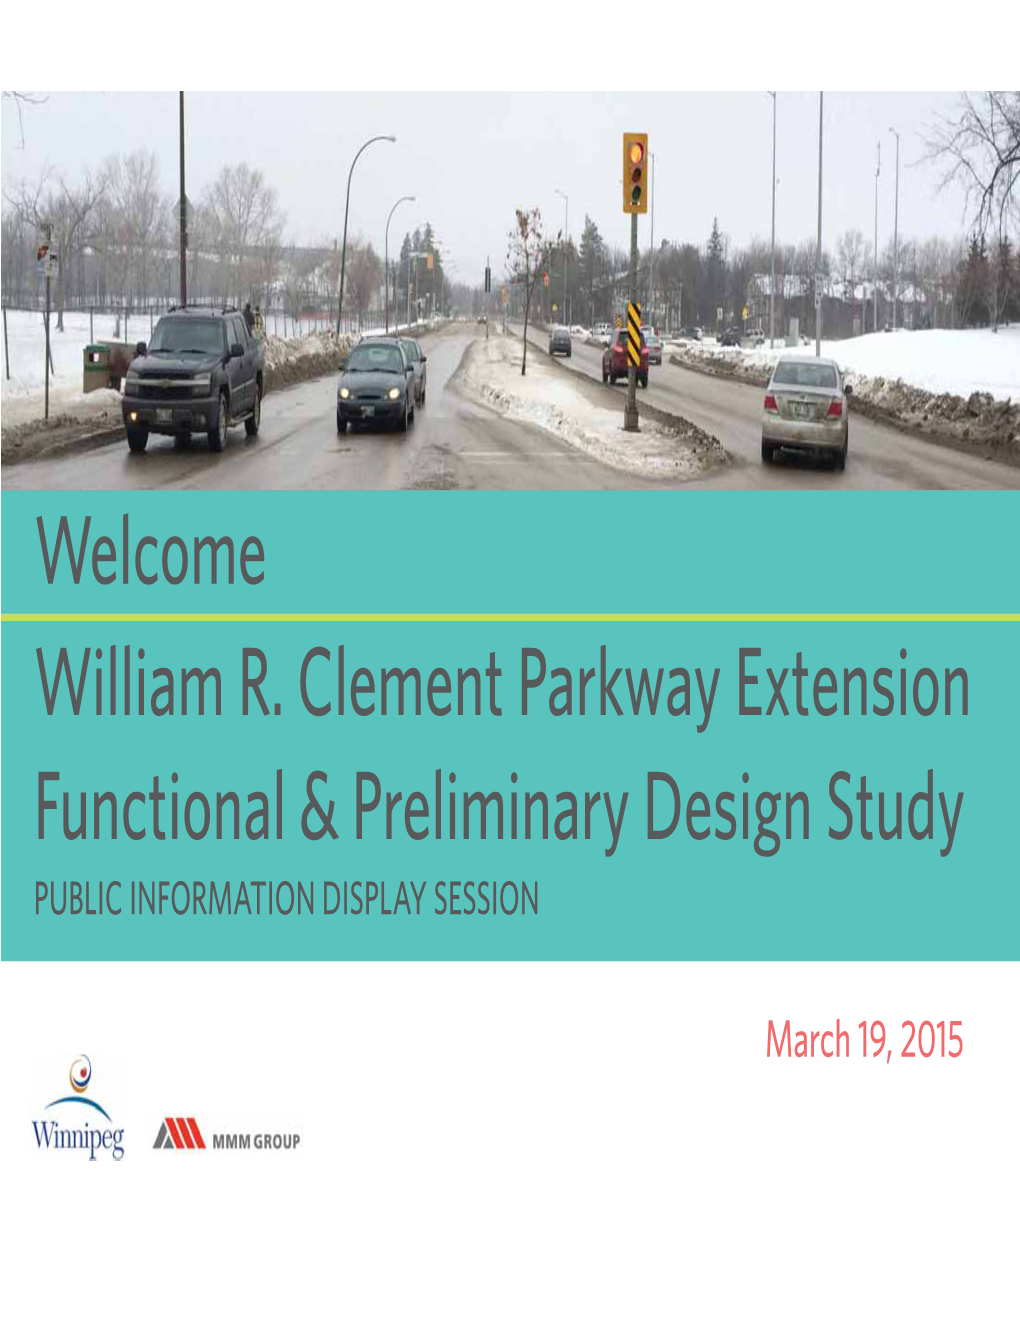 William R. Clement Parkway Extension Functional & Preliminary Design Study Welcome